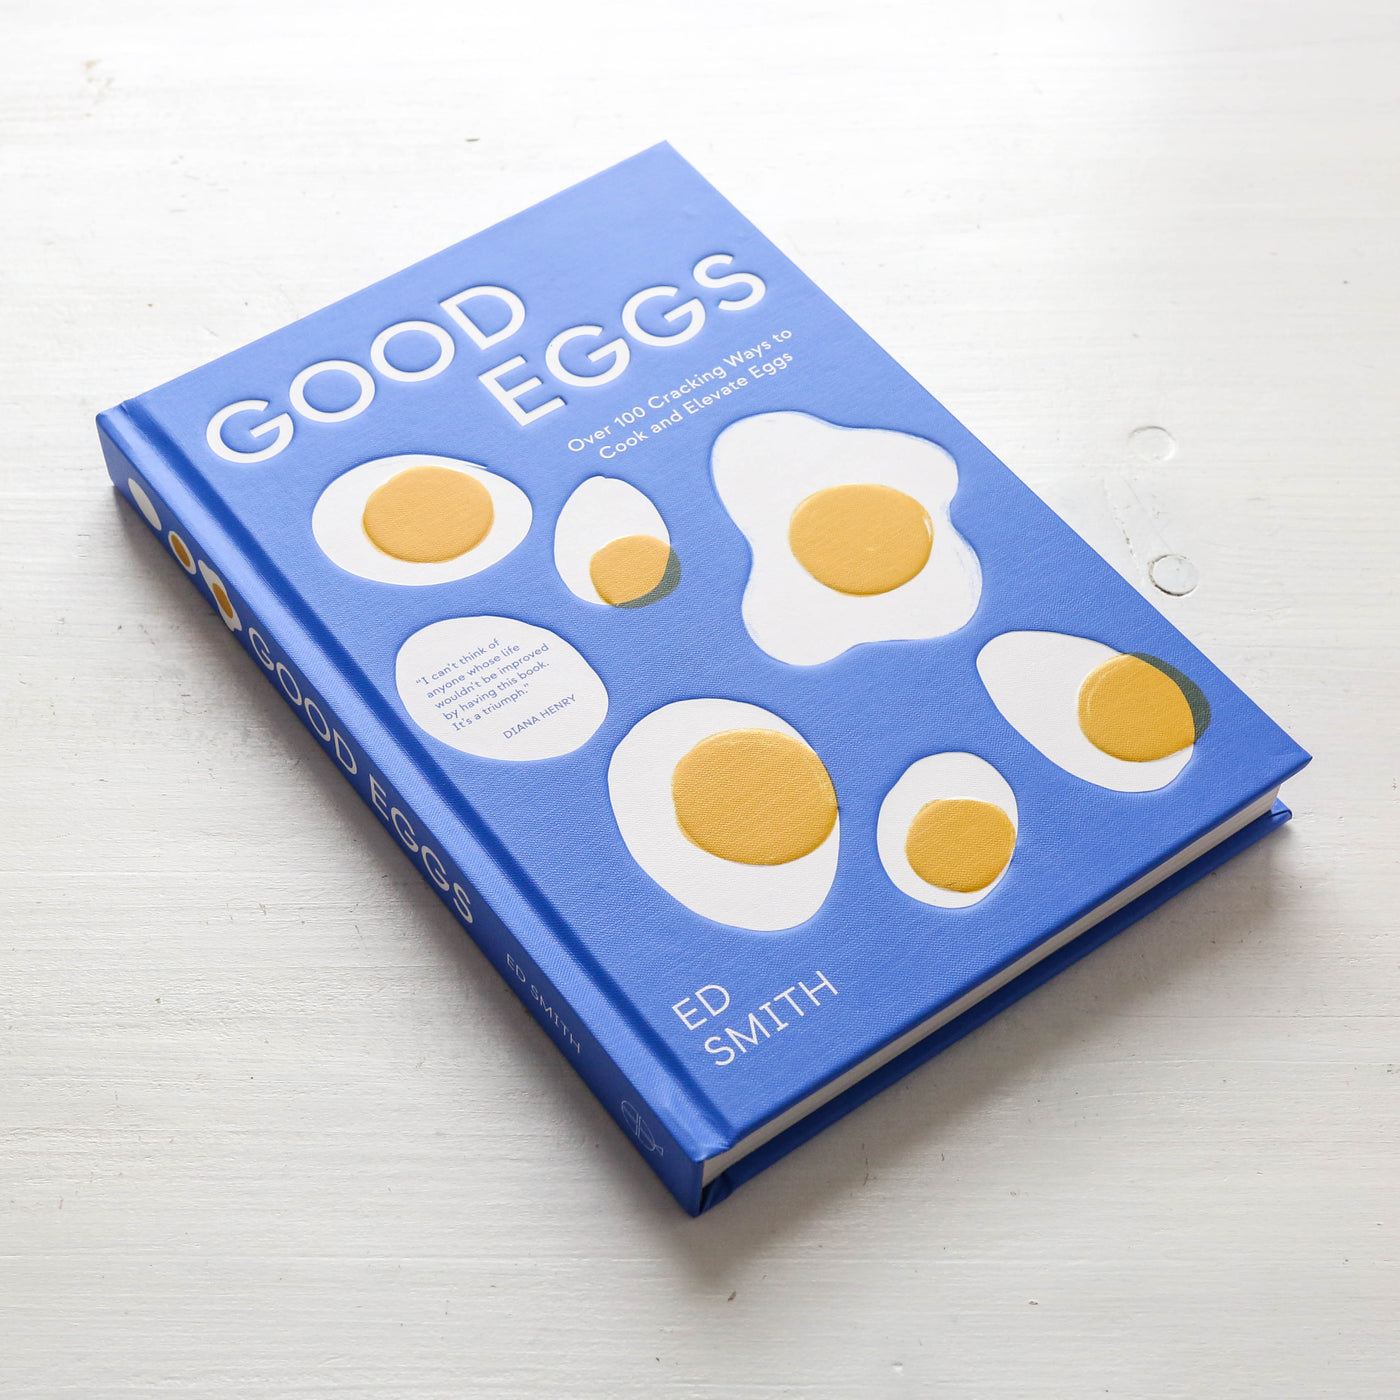 Good Eggs : Over 100 Cracking Ways to Cook and Elevate Eggs